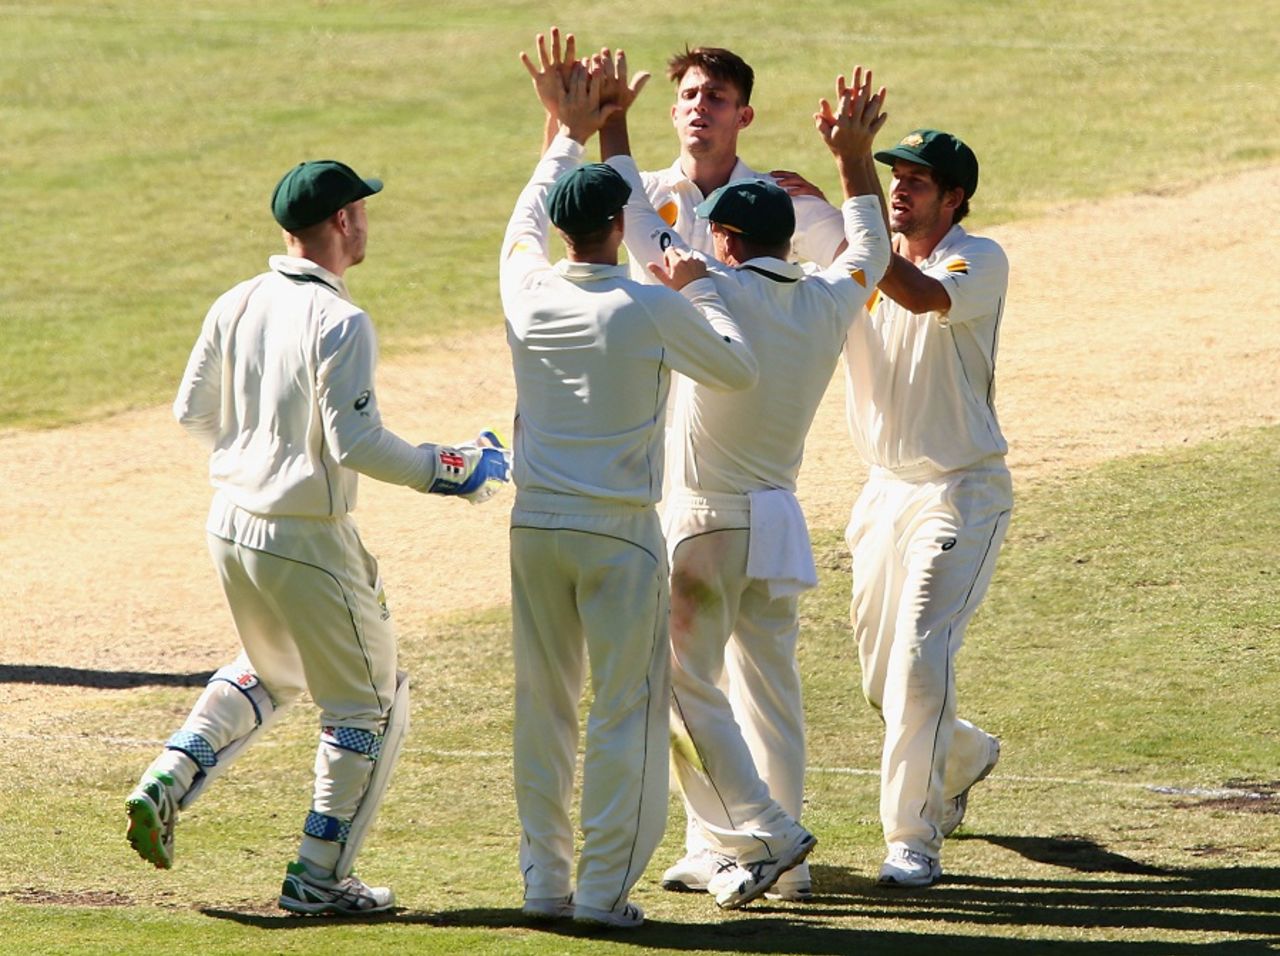 Mitchell Marsh celebrates a wicket with his team-mates, Australia v West Indies, 2nd Test, Melbourne, 4th day, December 29, 2015